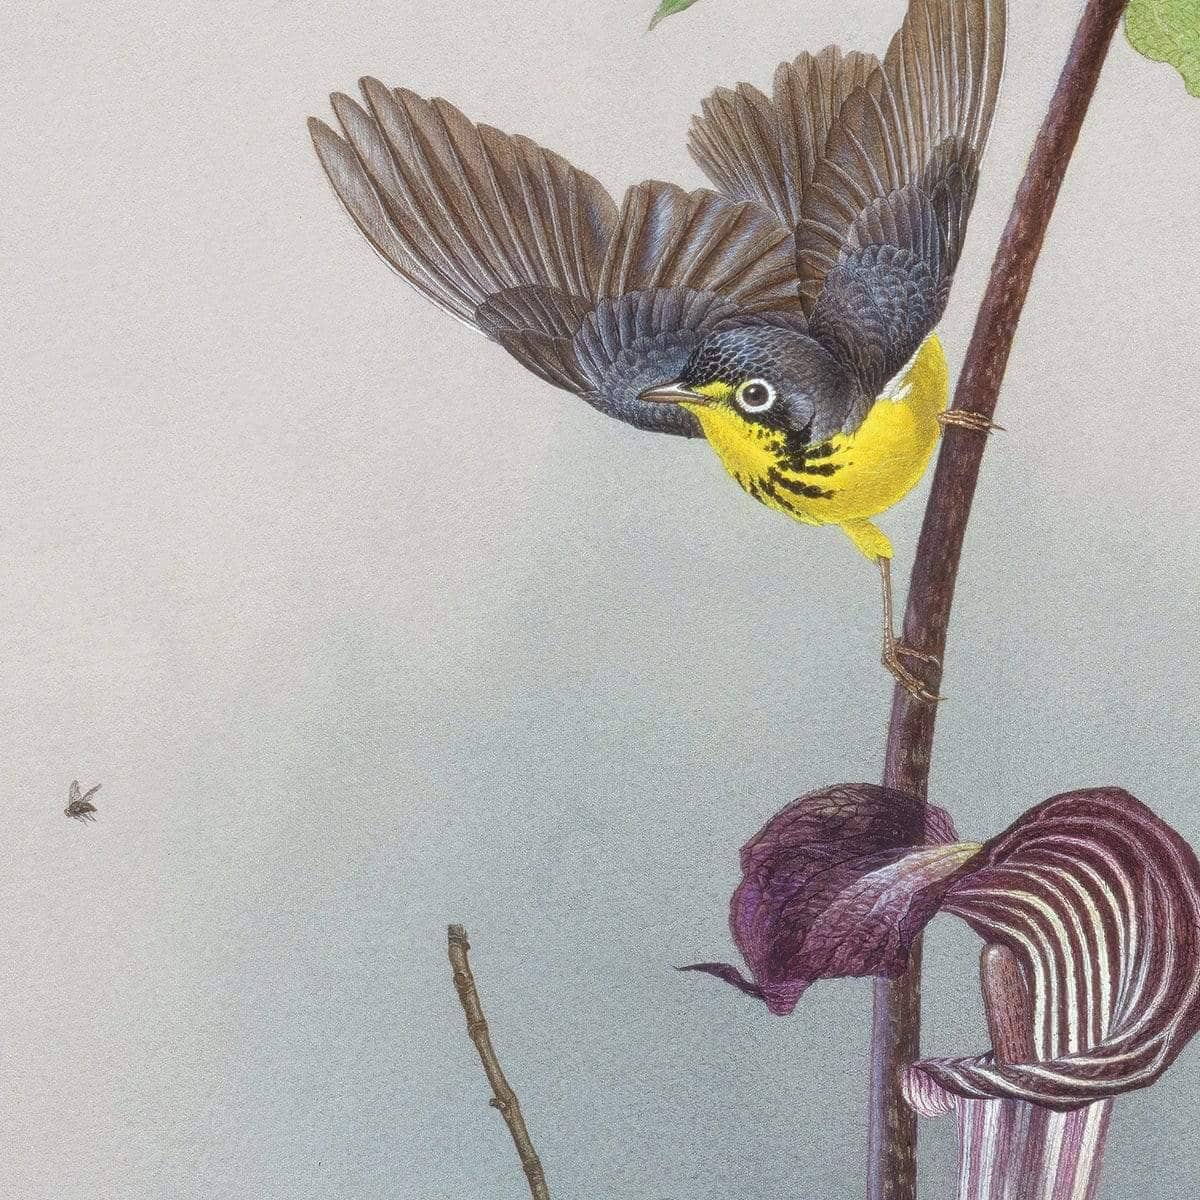 Canada Warbler on a Jack-in-the-pulpit - Art Print | Artwork by Glen Loates